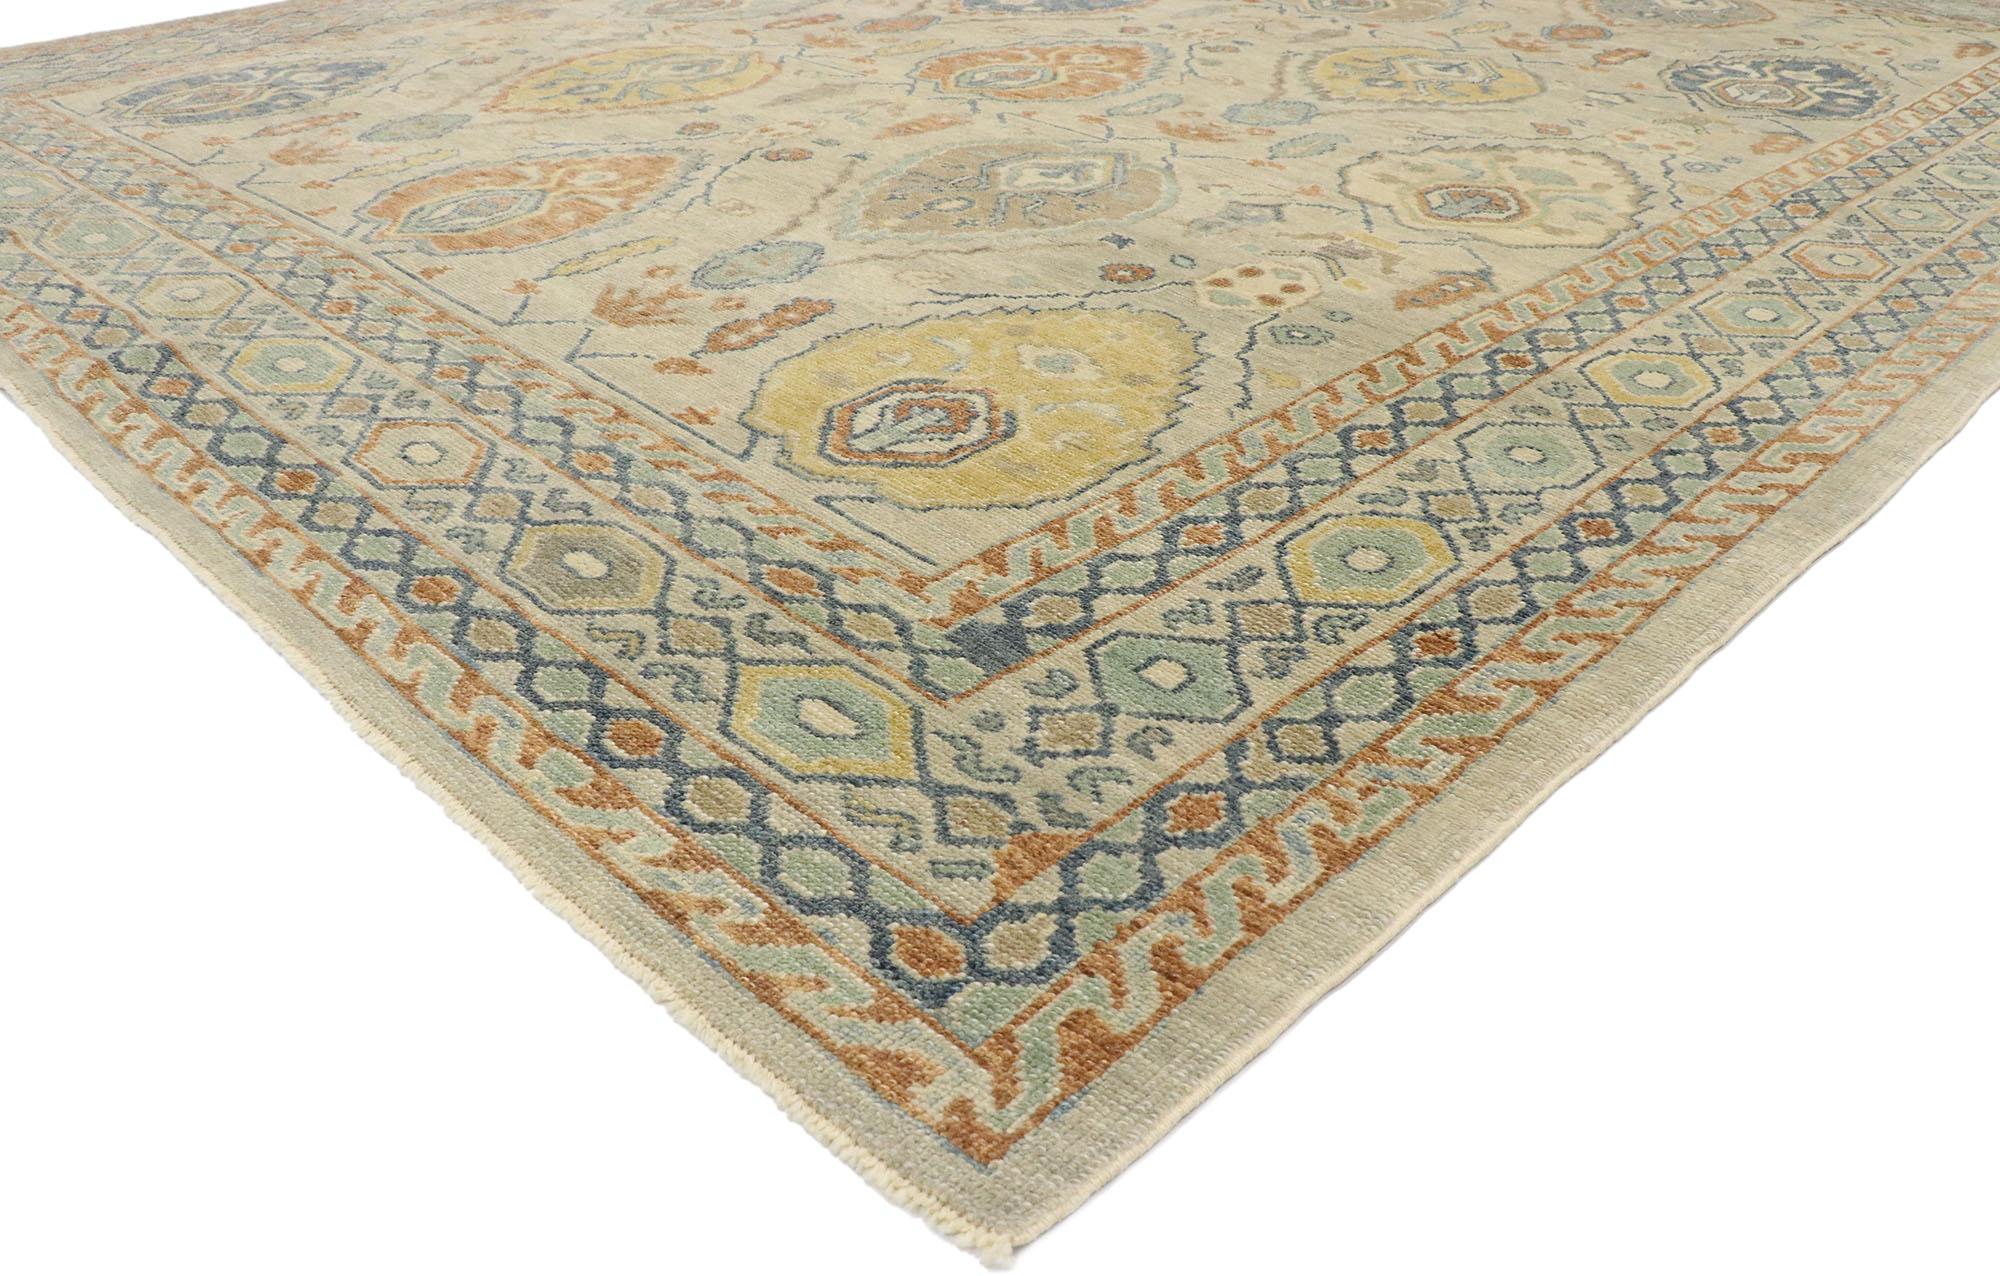 53410, New Contemporary Turkish Oushak Rug with Modern Transitional Style. Blending elements from the modern world with a coastal color palette, this hand knotted wool Turkish Oushak rug beautifully embodies a contemporary Martha's Vineyard style.